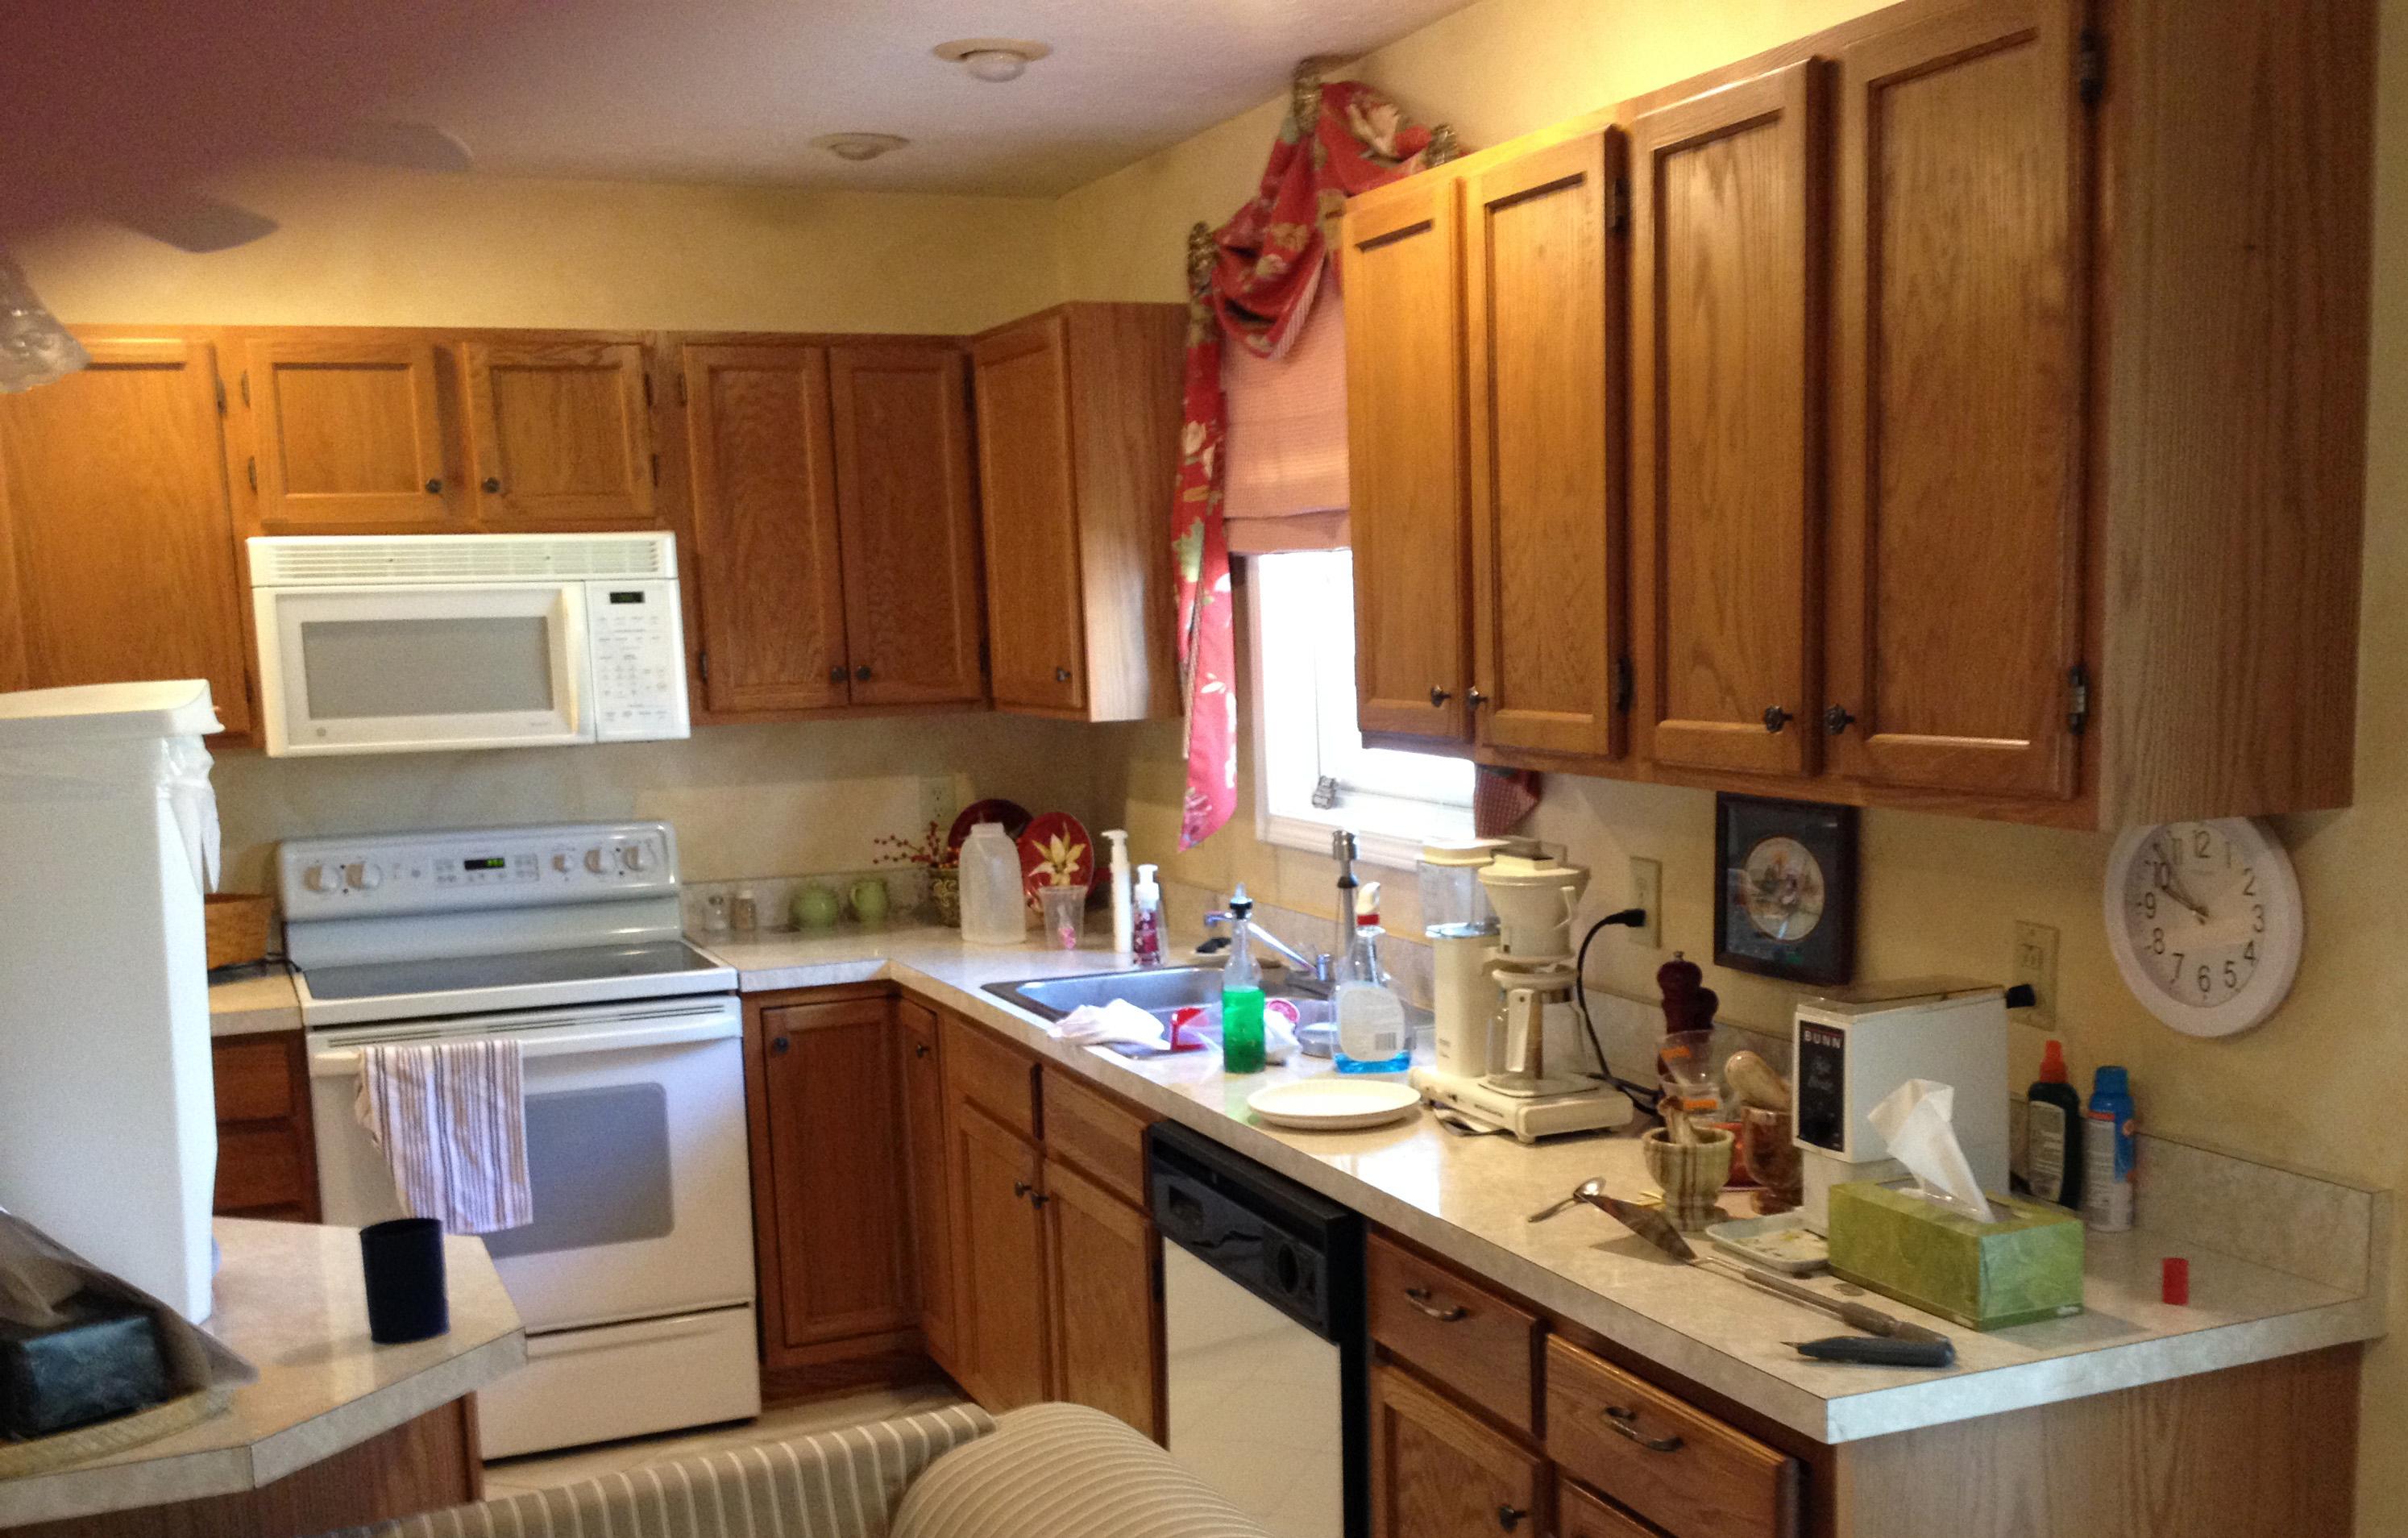 Client was expecting company and had to have kitchen remodeled and done in 30 days